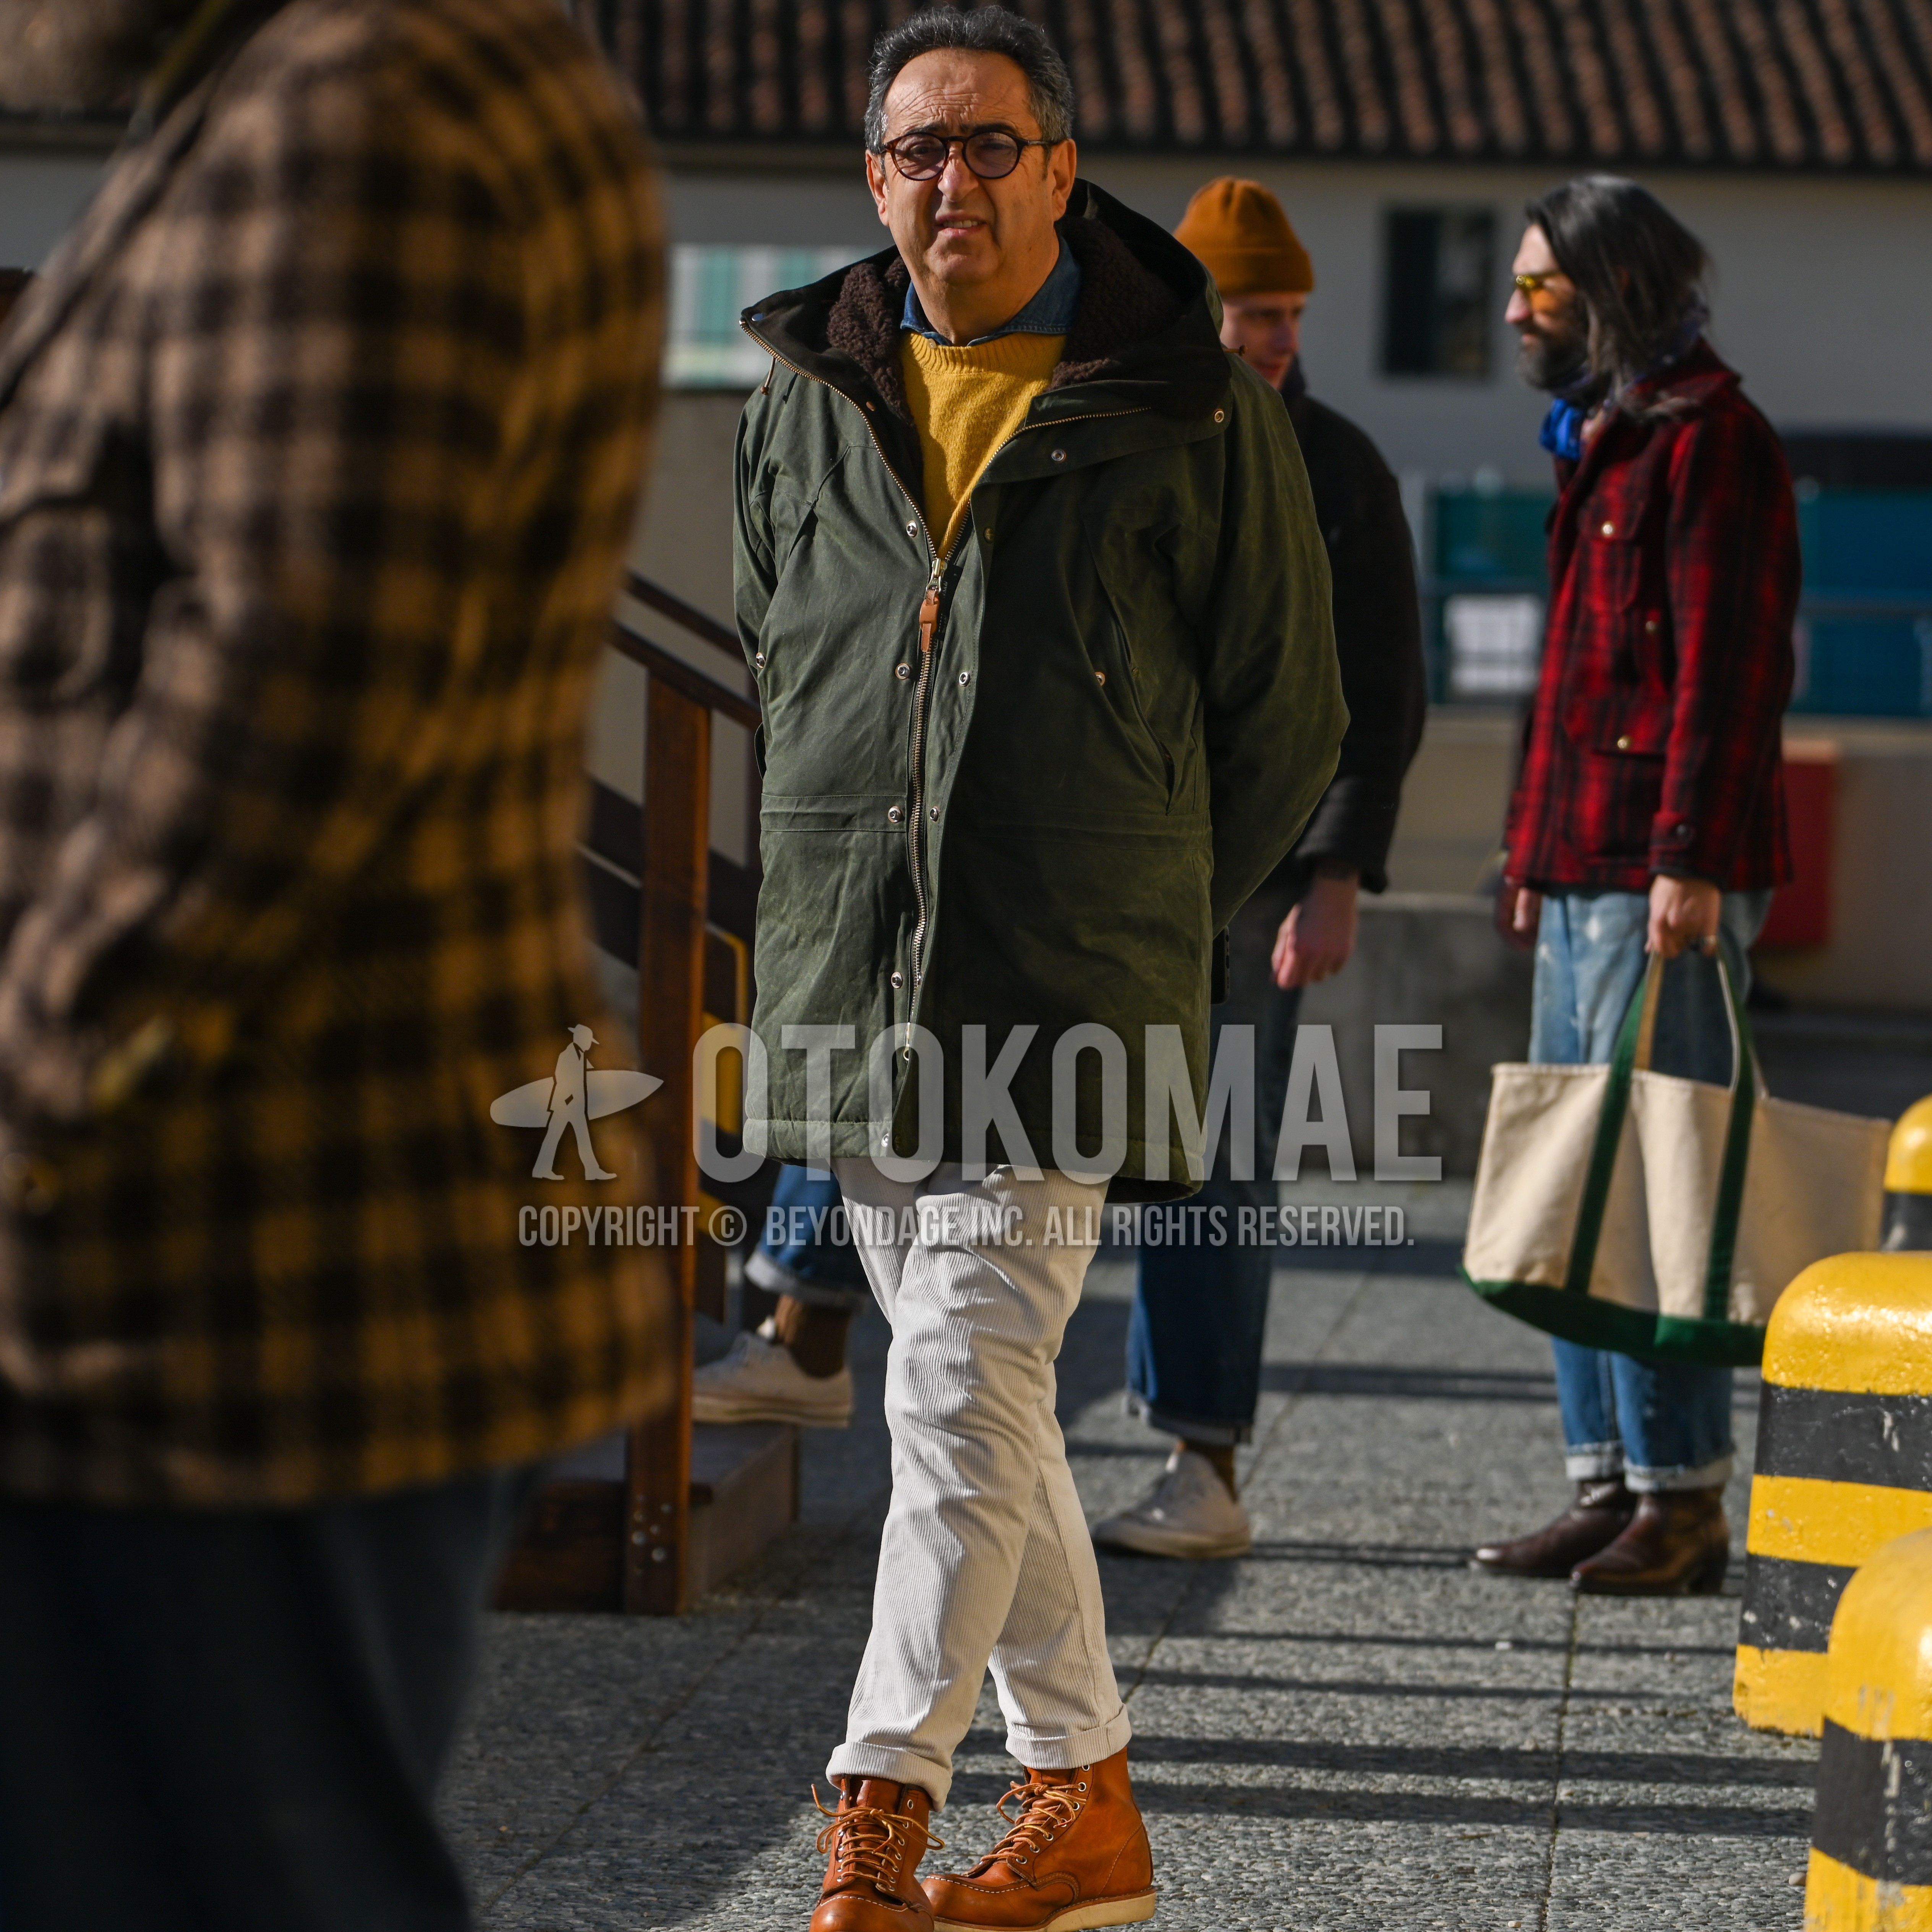 Men's autumn winter outfit with brown plain glasses, olive green outerwear hooded coat, plain denim shirt/chambray shirt, yellow plain sweater, beige plain winter pants (corduroy,velour), brown work boots.